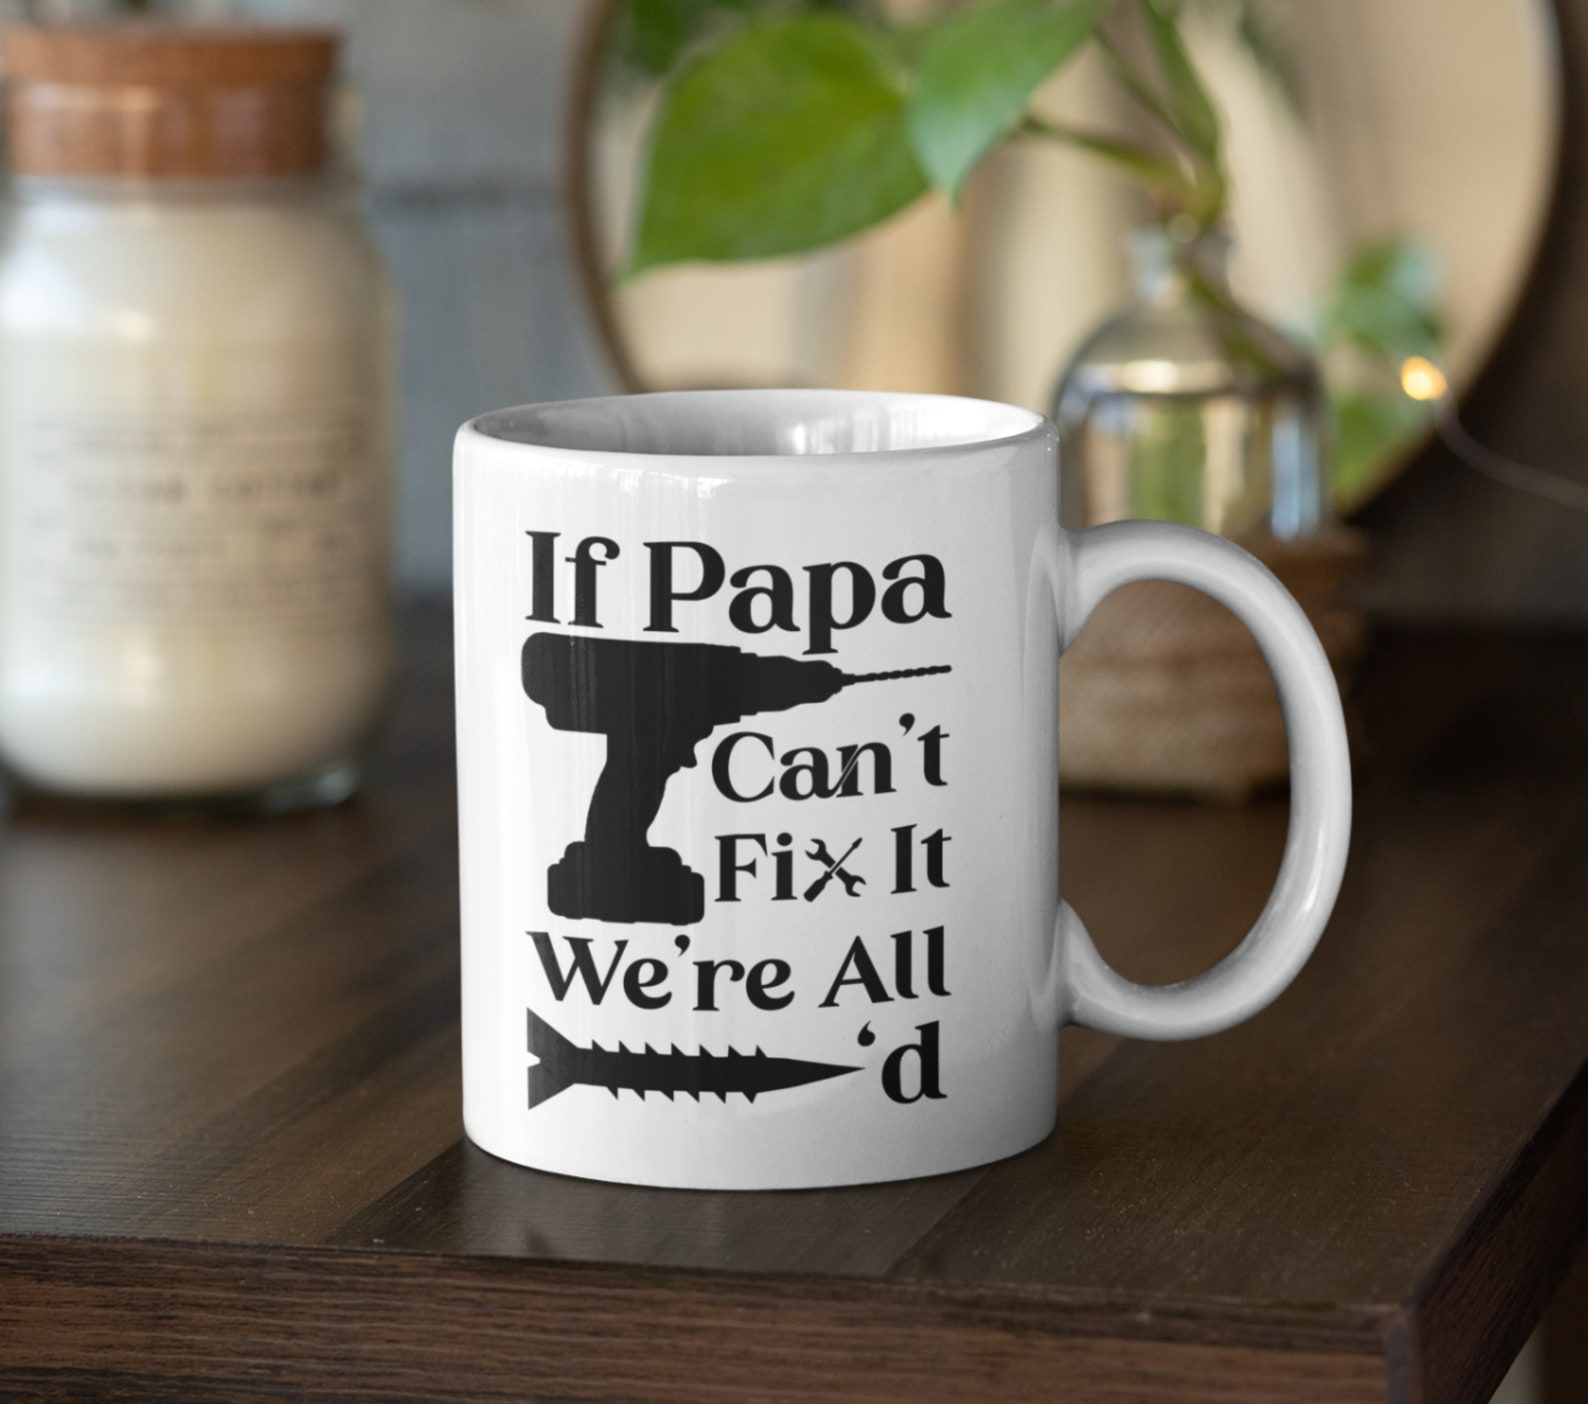 Funny Mug For Dad For Fathers Day For Birthday T For Dad Tools Free Shipping Etsy